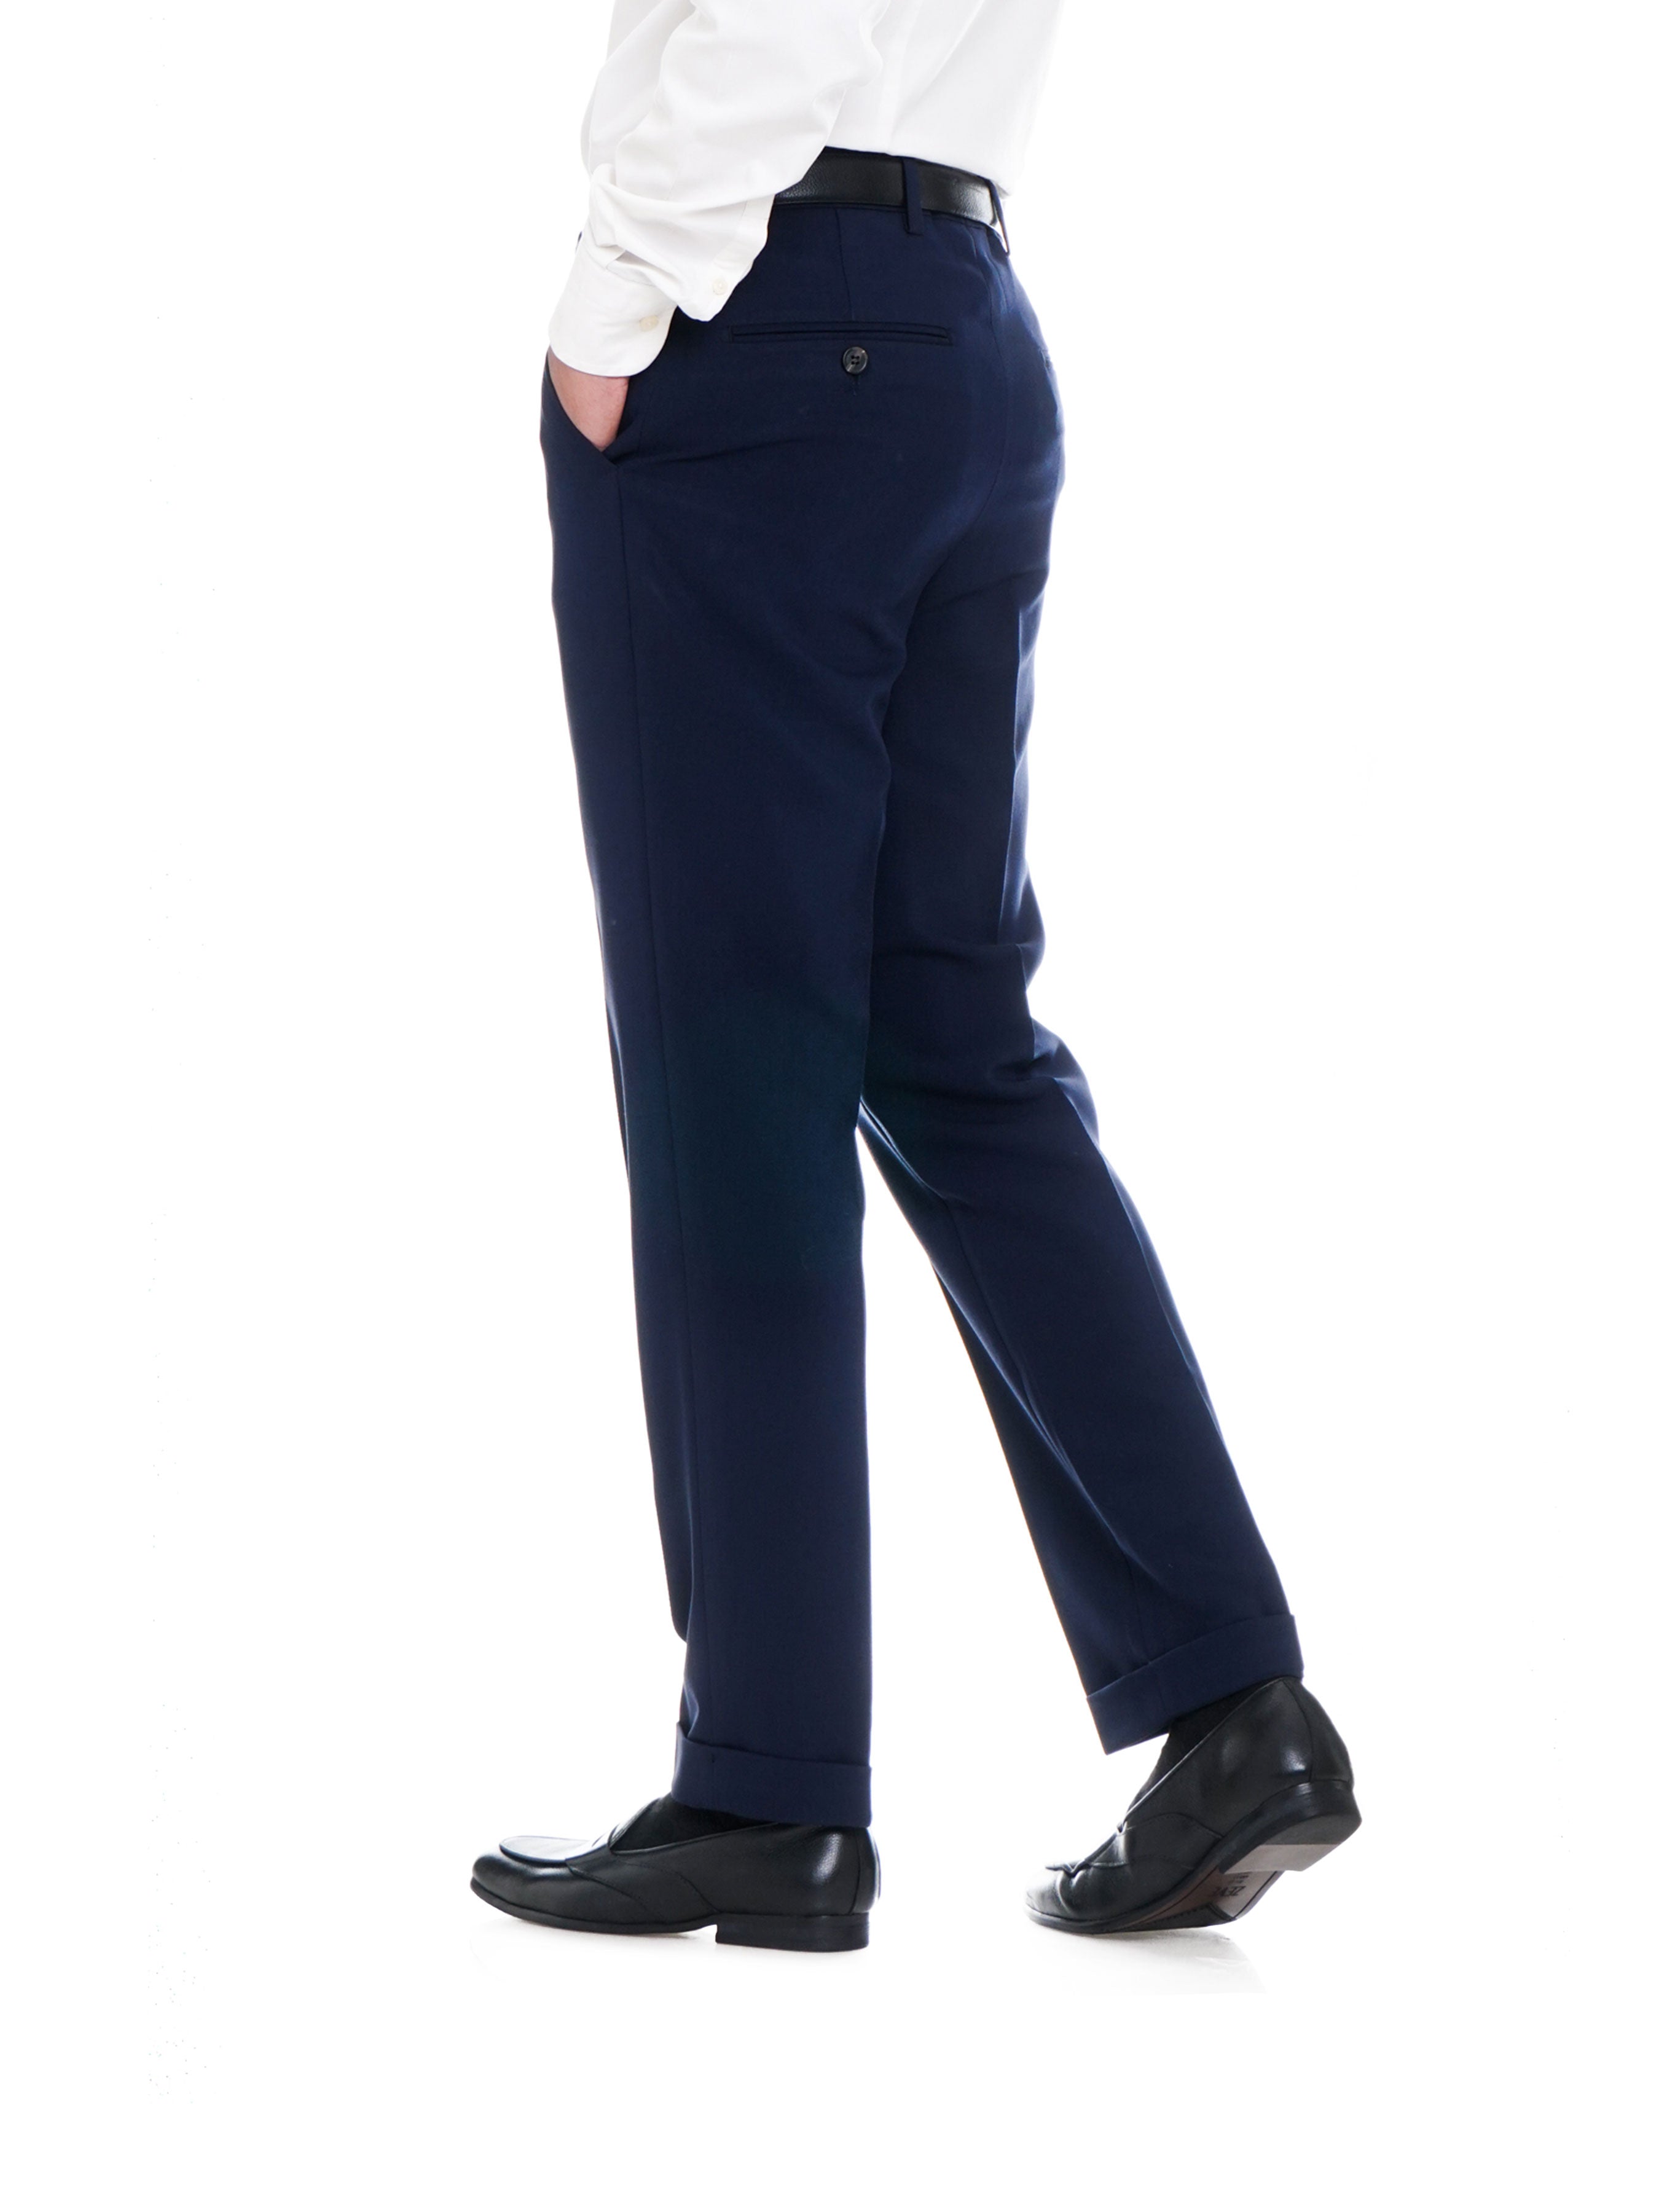 Trousers With Belt Loop -  Navy Blue Plain Cuffed (Stretchable) - Zeve Shoes